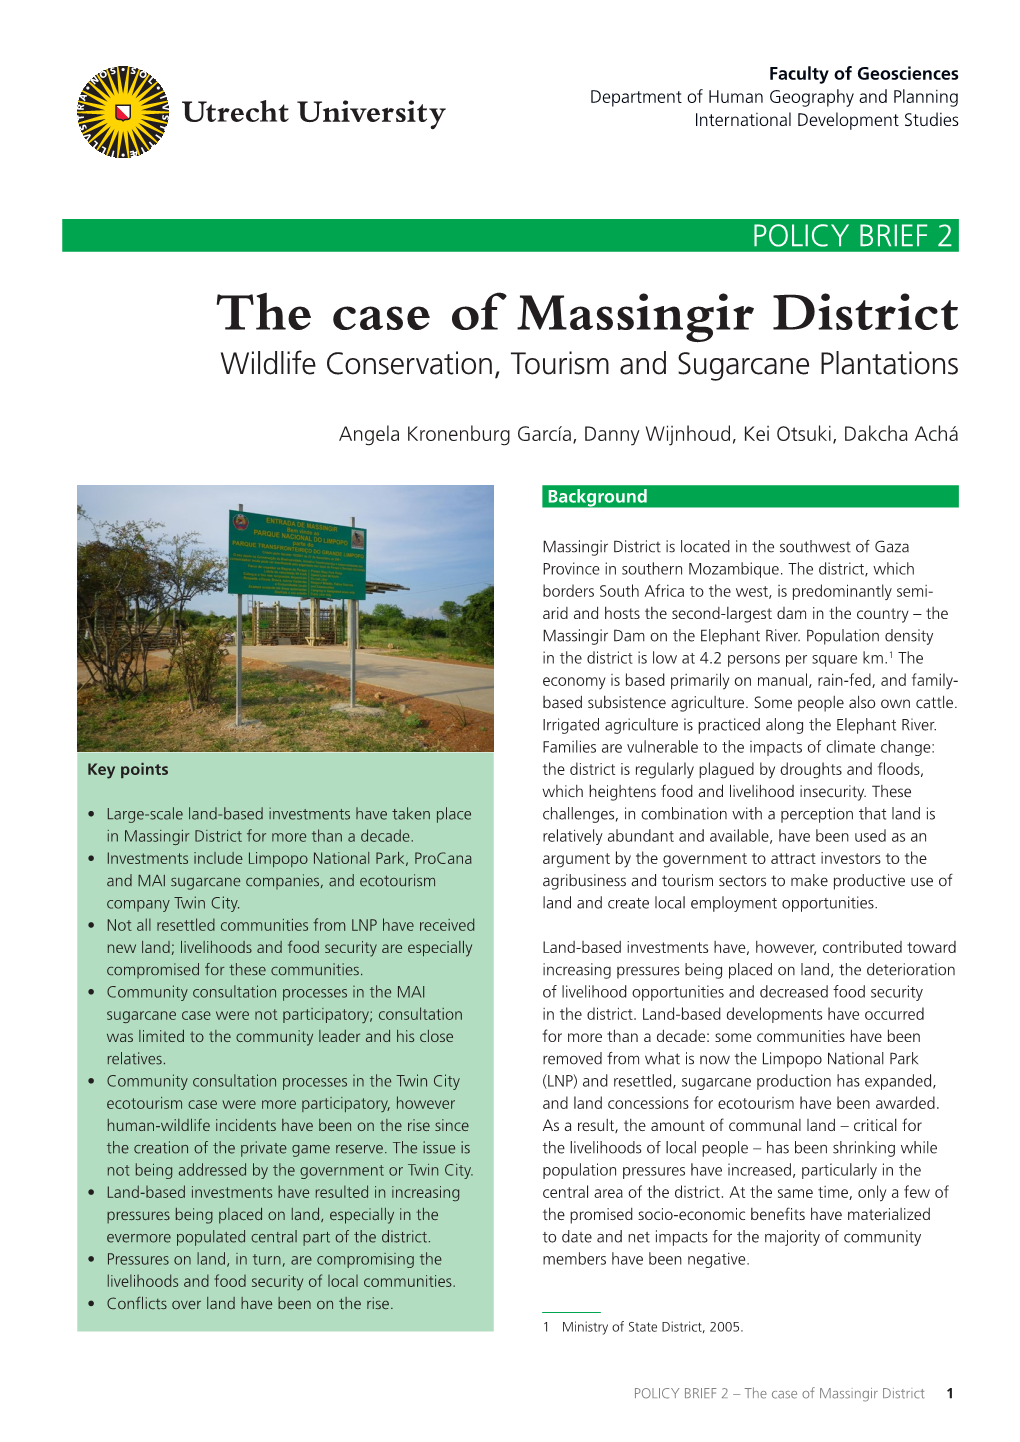 The Case of Massingir District Wildlife Conservation, Tourism and Sugarcane Plantations